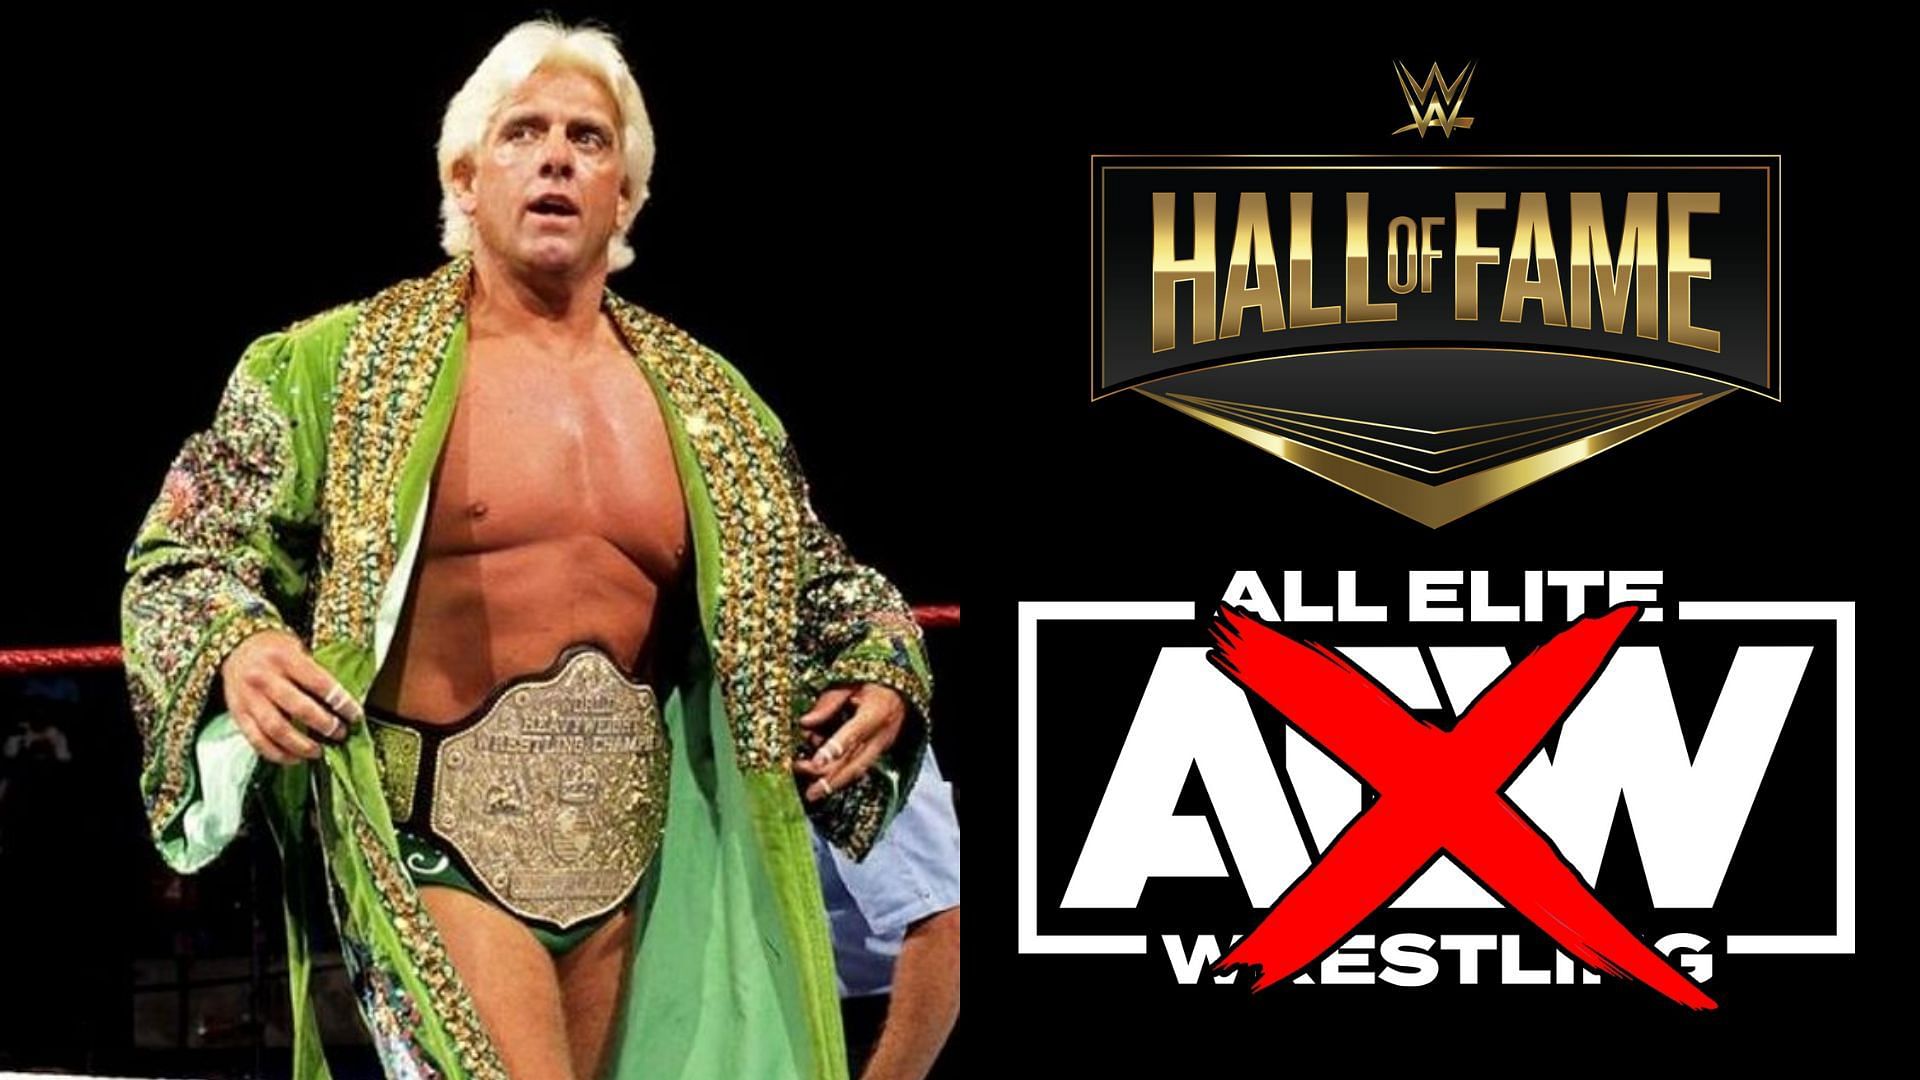 Has Ric Flair soured his relations with WWE?